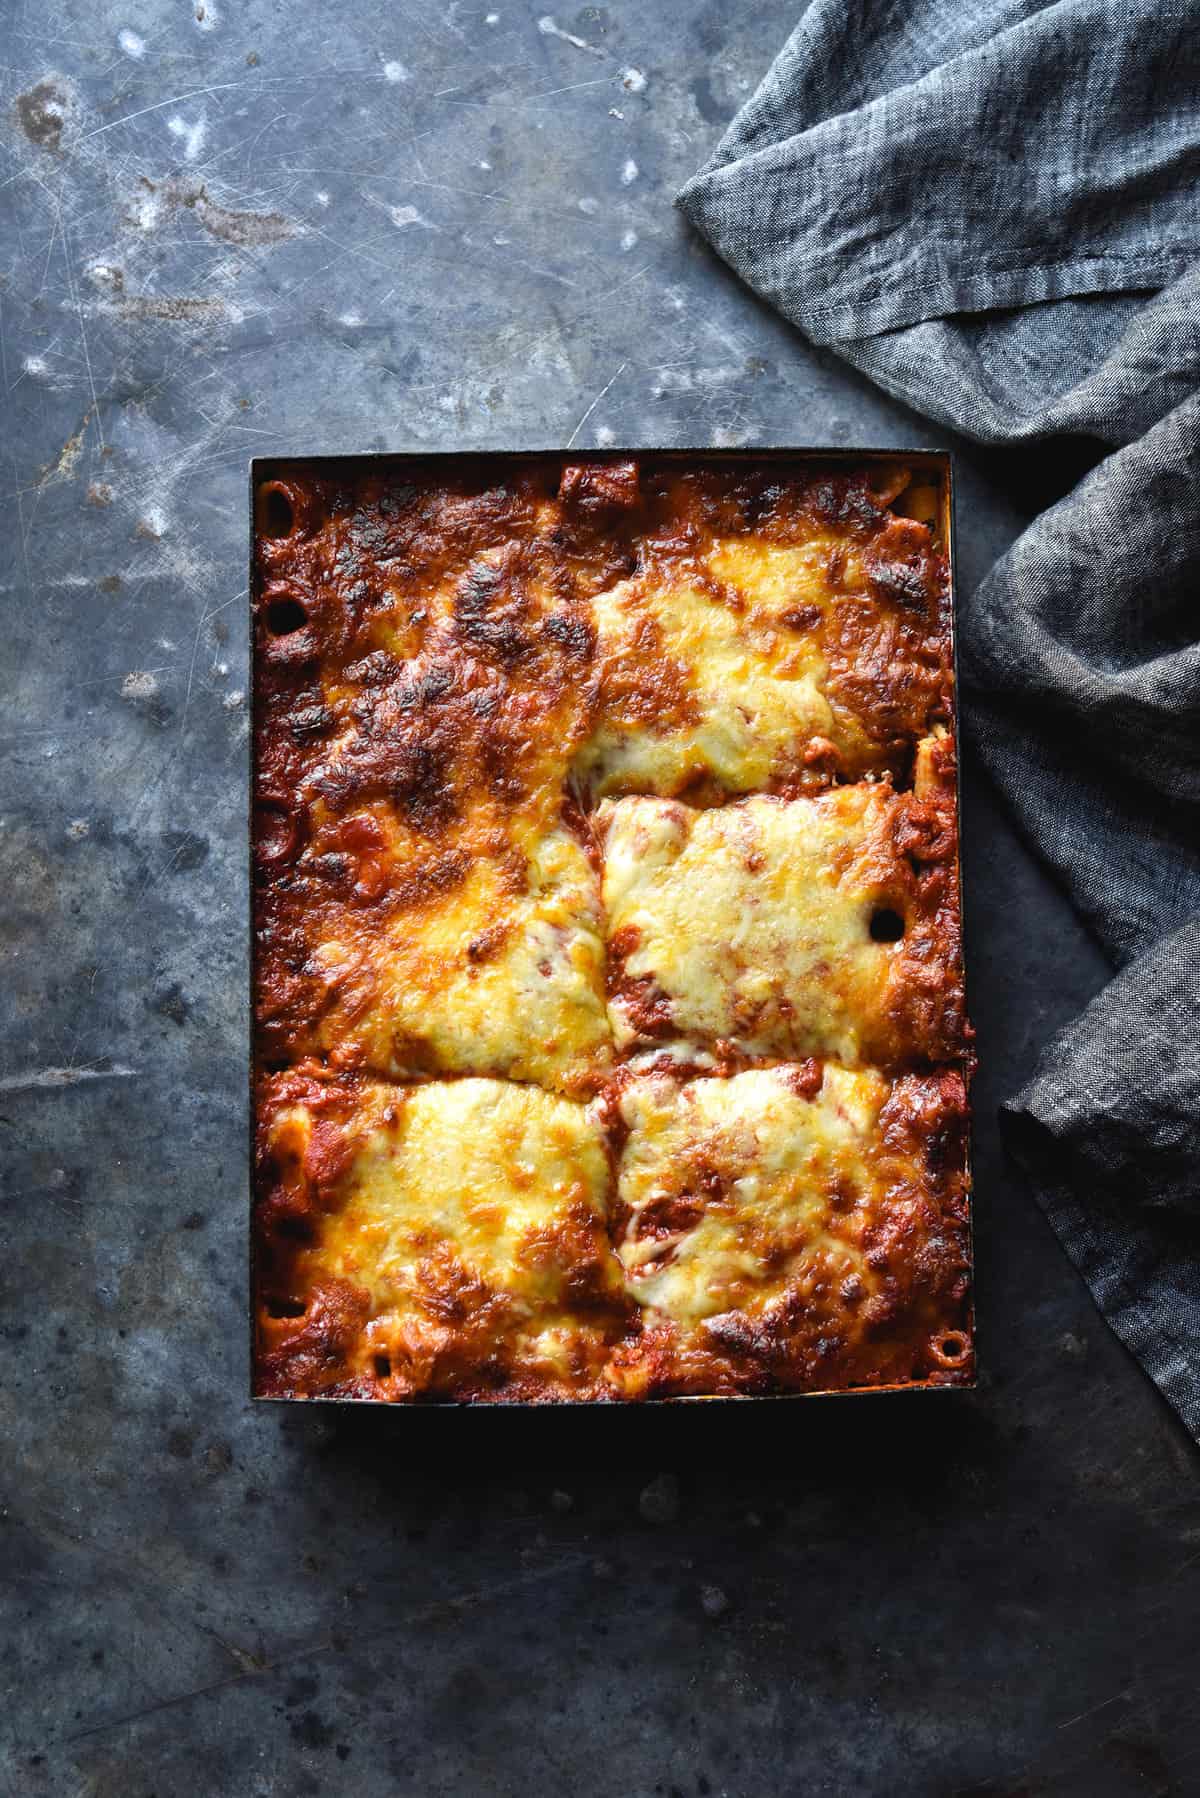 An aerial image of a cheesy gluten free pasta bake on a dark blue steel backdrop